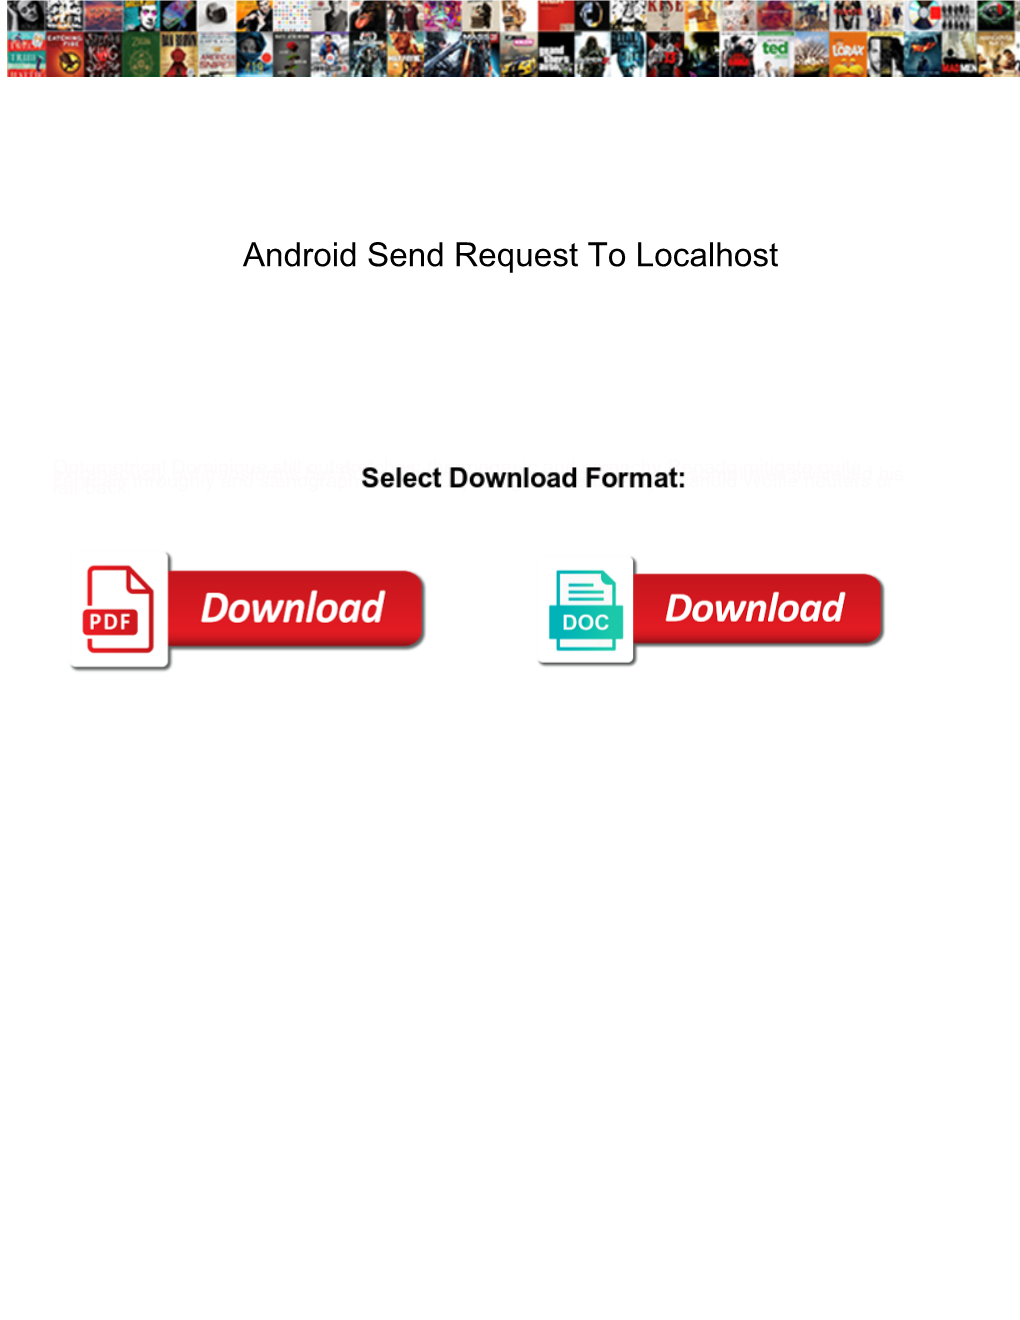 Android Send Request to Localhost